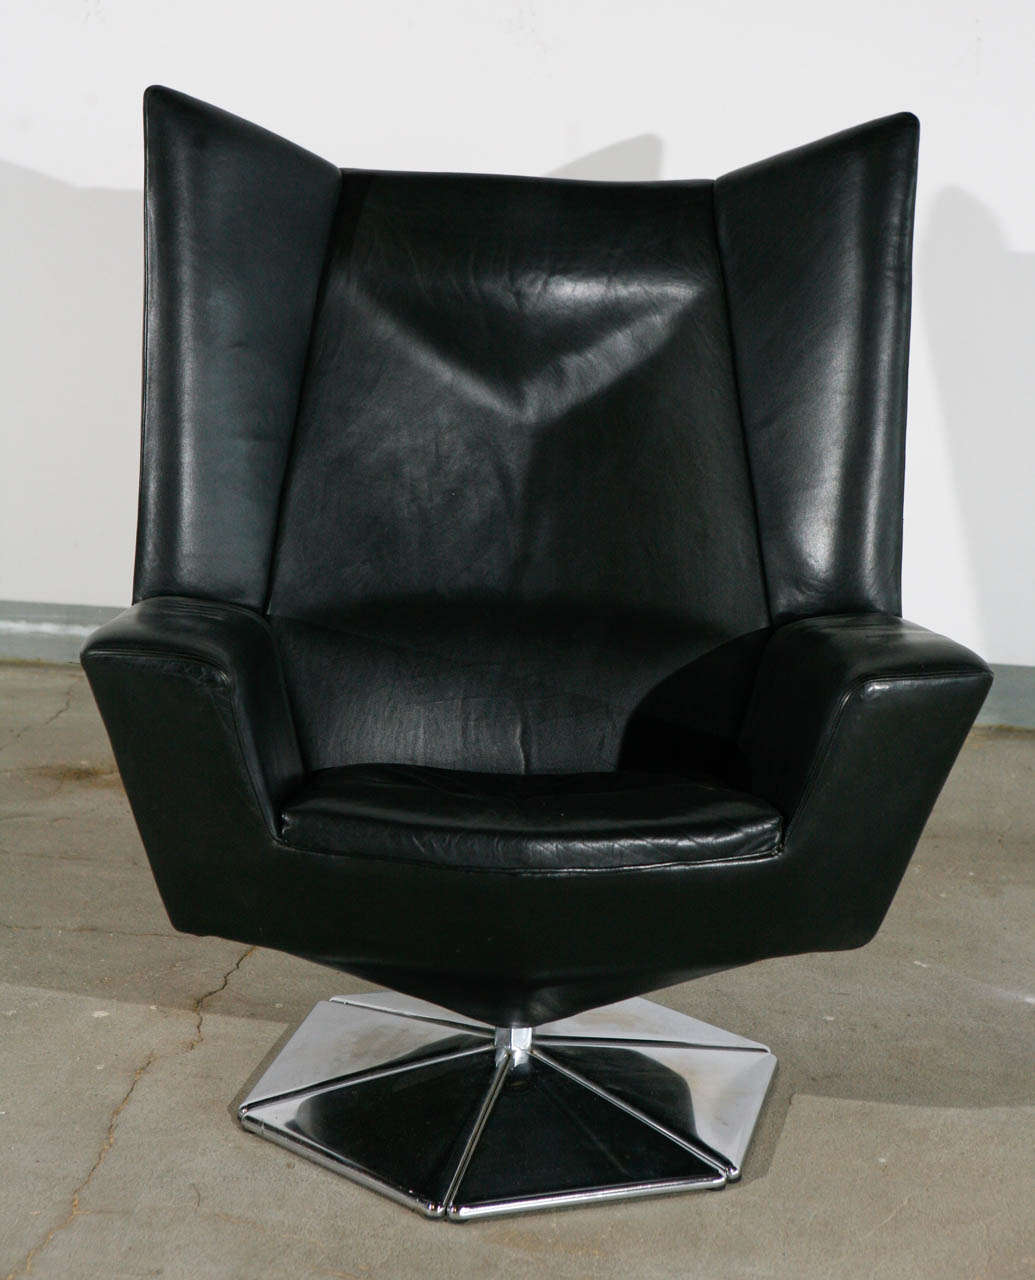 Viotto Haapalainen, 'Prisma' chair, manufactured by Tehokaluste Oy of Finland, circa 1970.